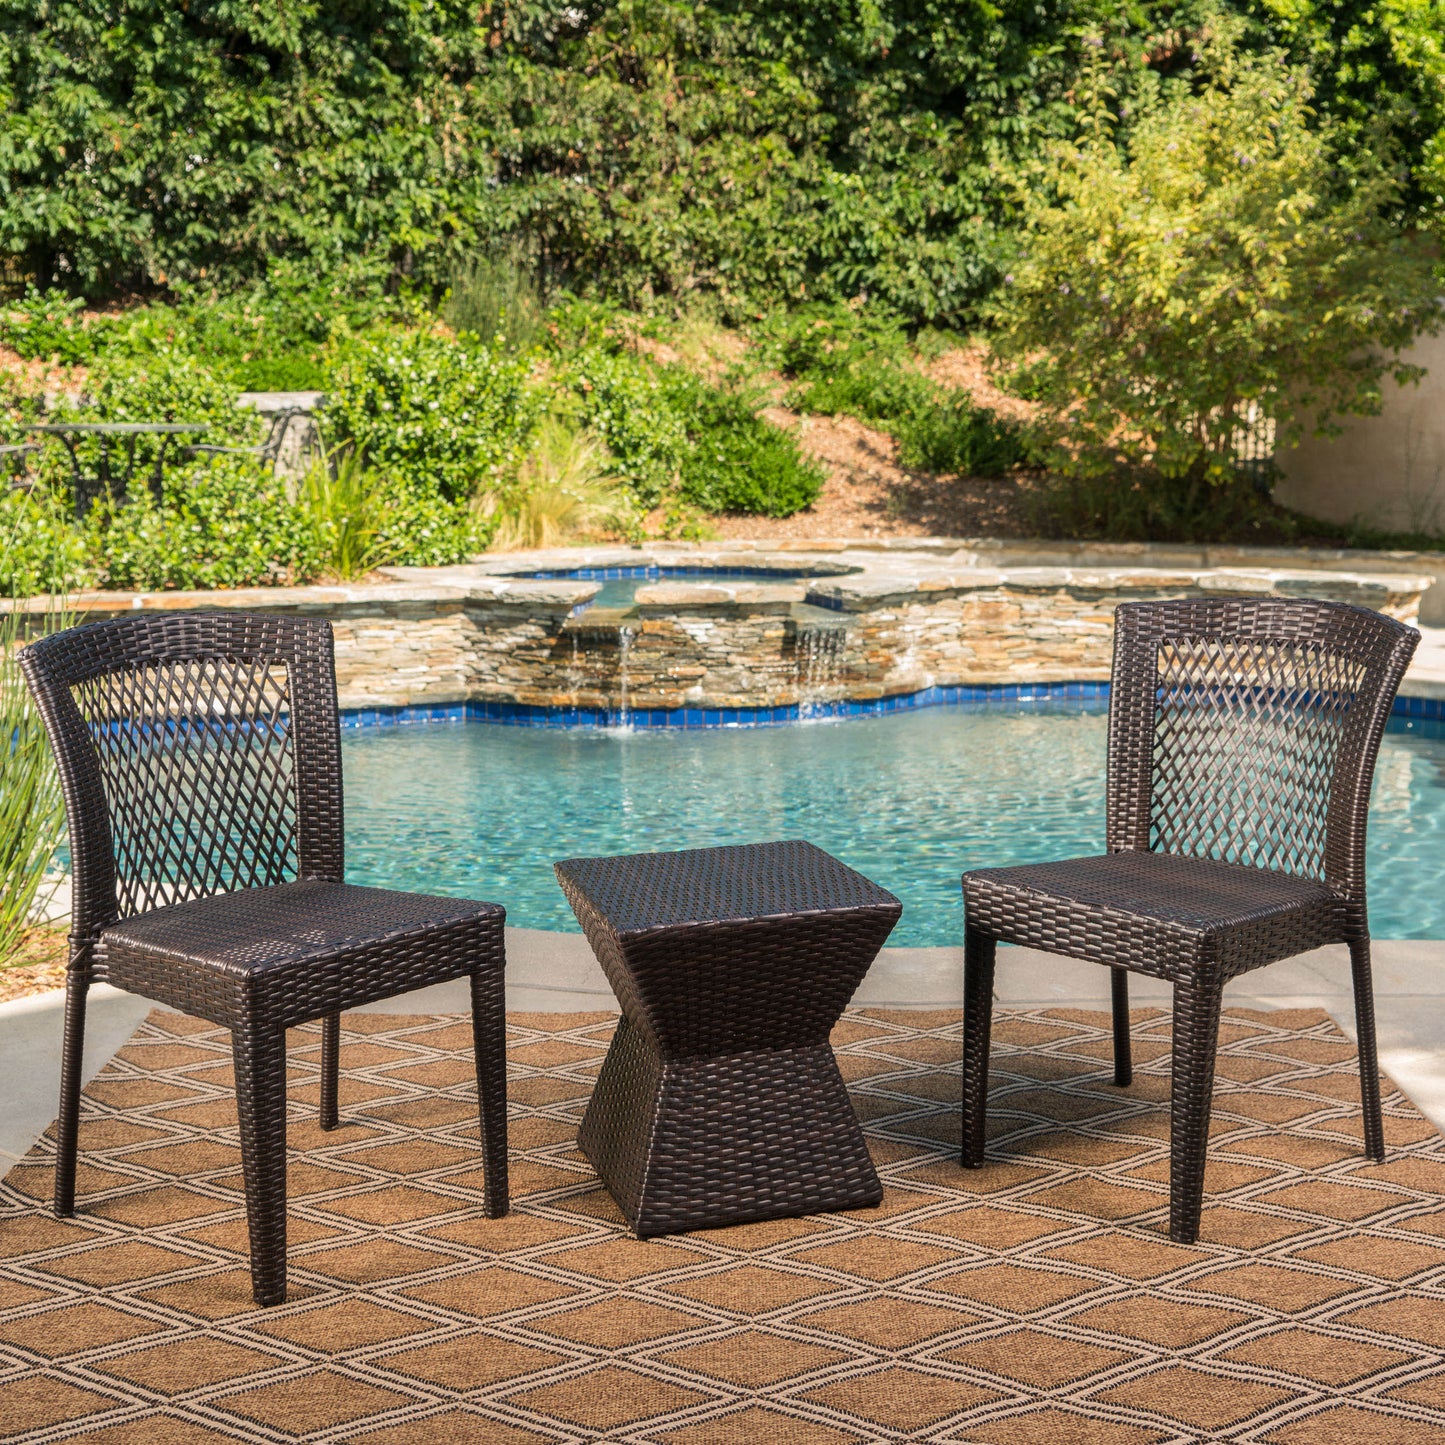 Malsborough Outdoor 3 Piece Multi-Brown Wicker Chat Set with Stacking Chairs